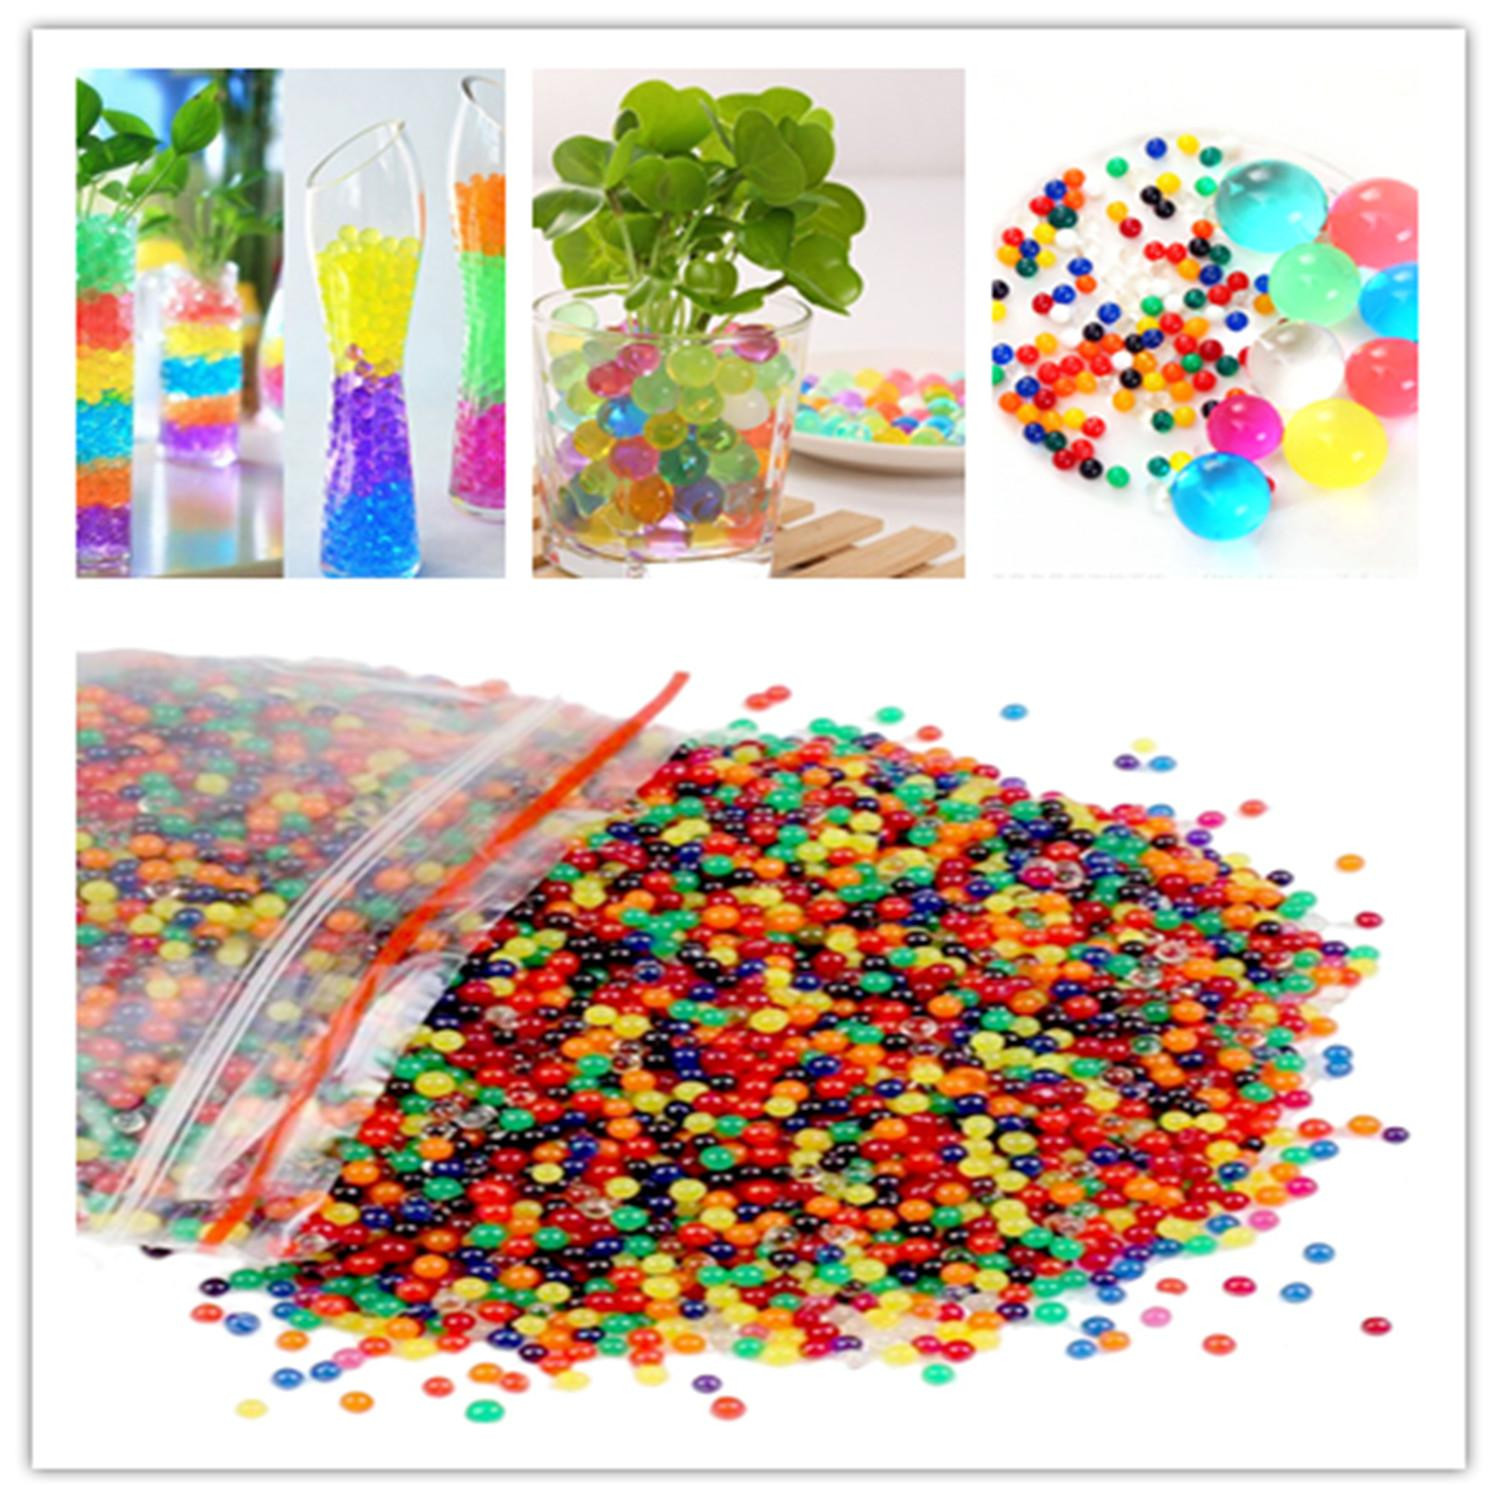 21 attractive Small Vase Filler Beads 2024 free download small vase filler beads of beads buy beads at best price in singapore www lazada sg for bulk of 6000 beads 100g mixed water beads water growing balls for vase filler wedding home